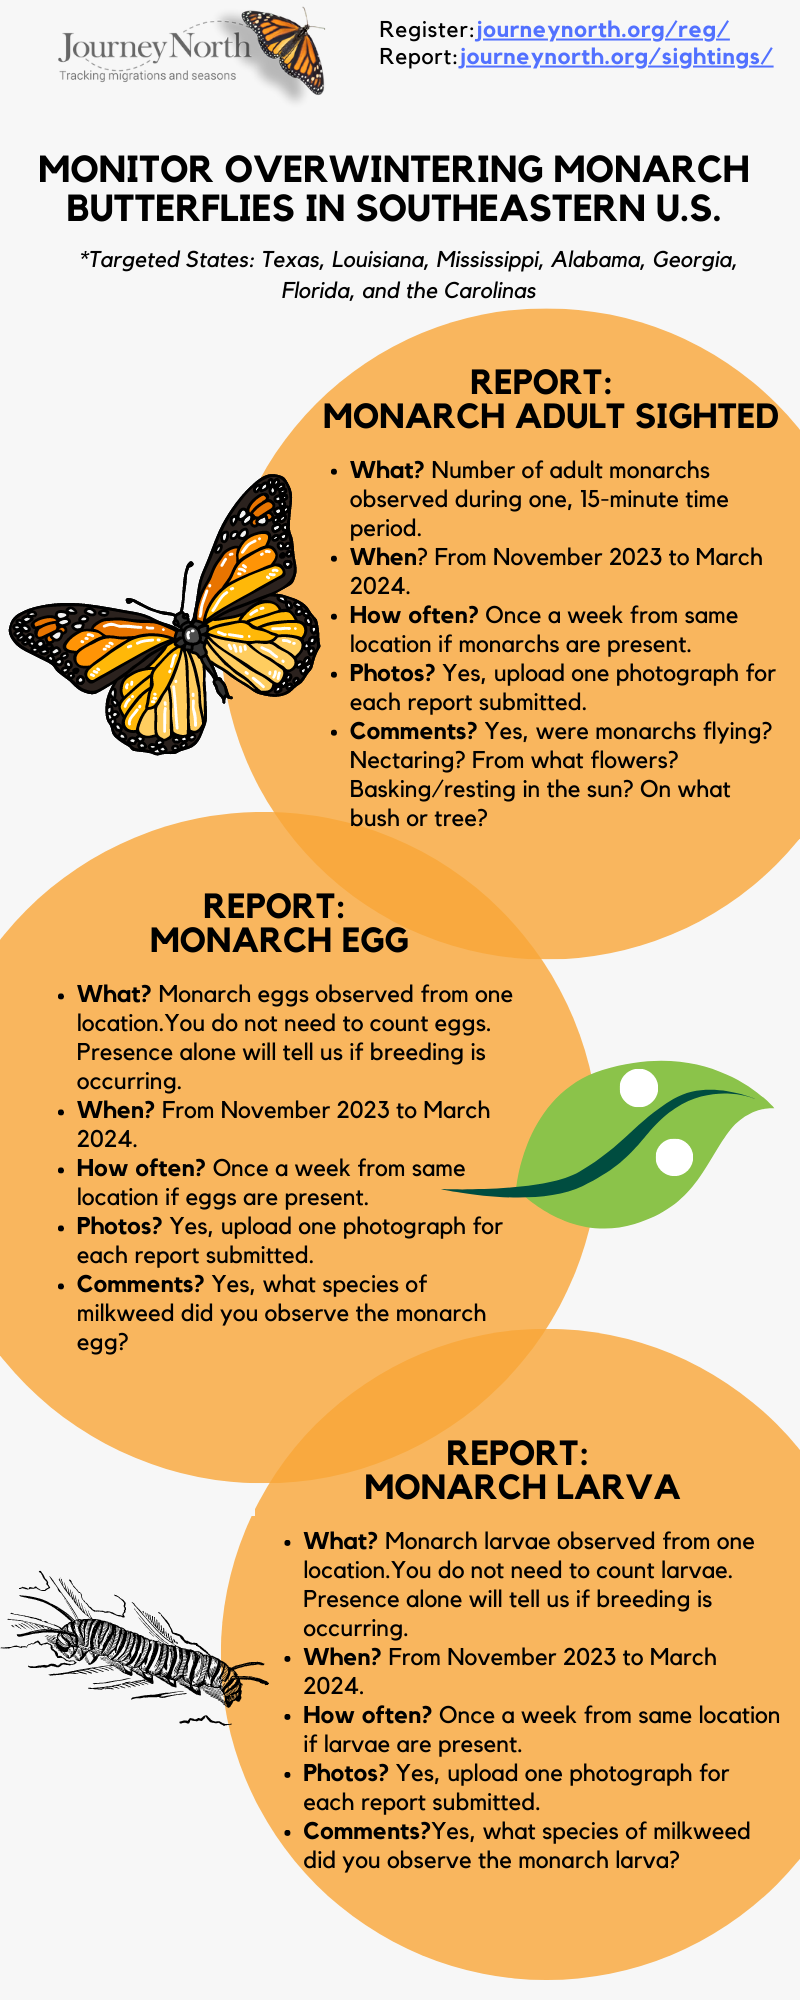 how to monitor monarchs during the winter in the southeastern US